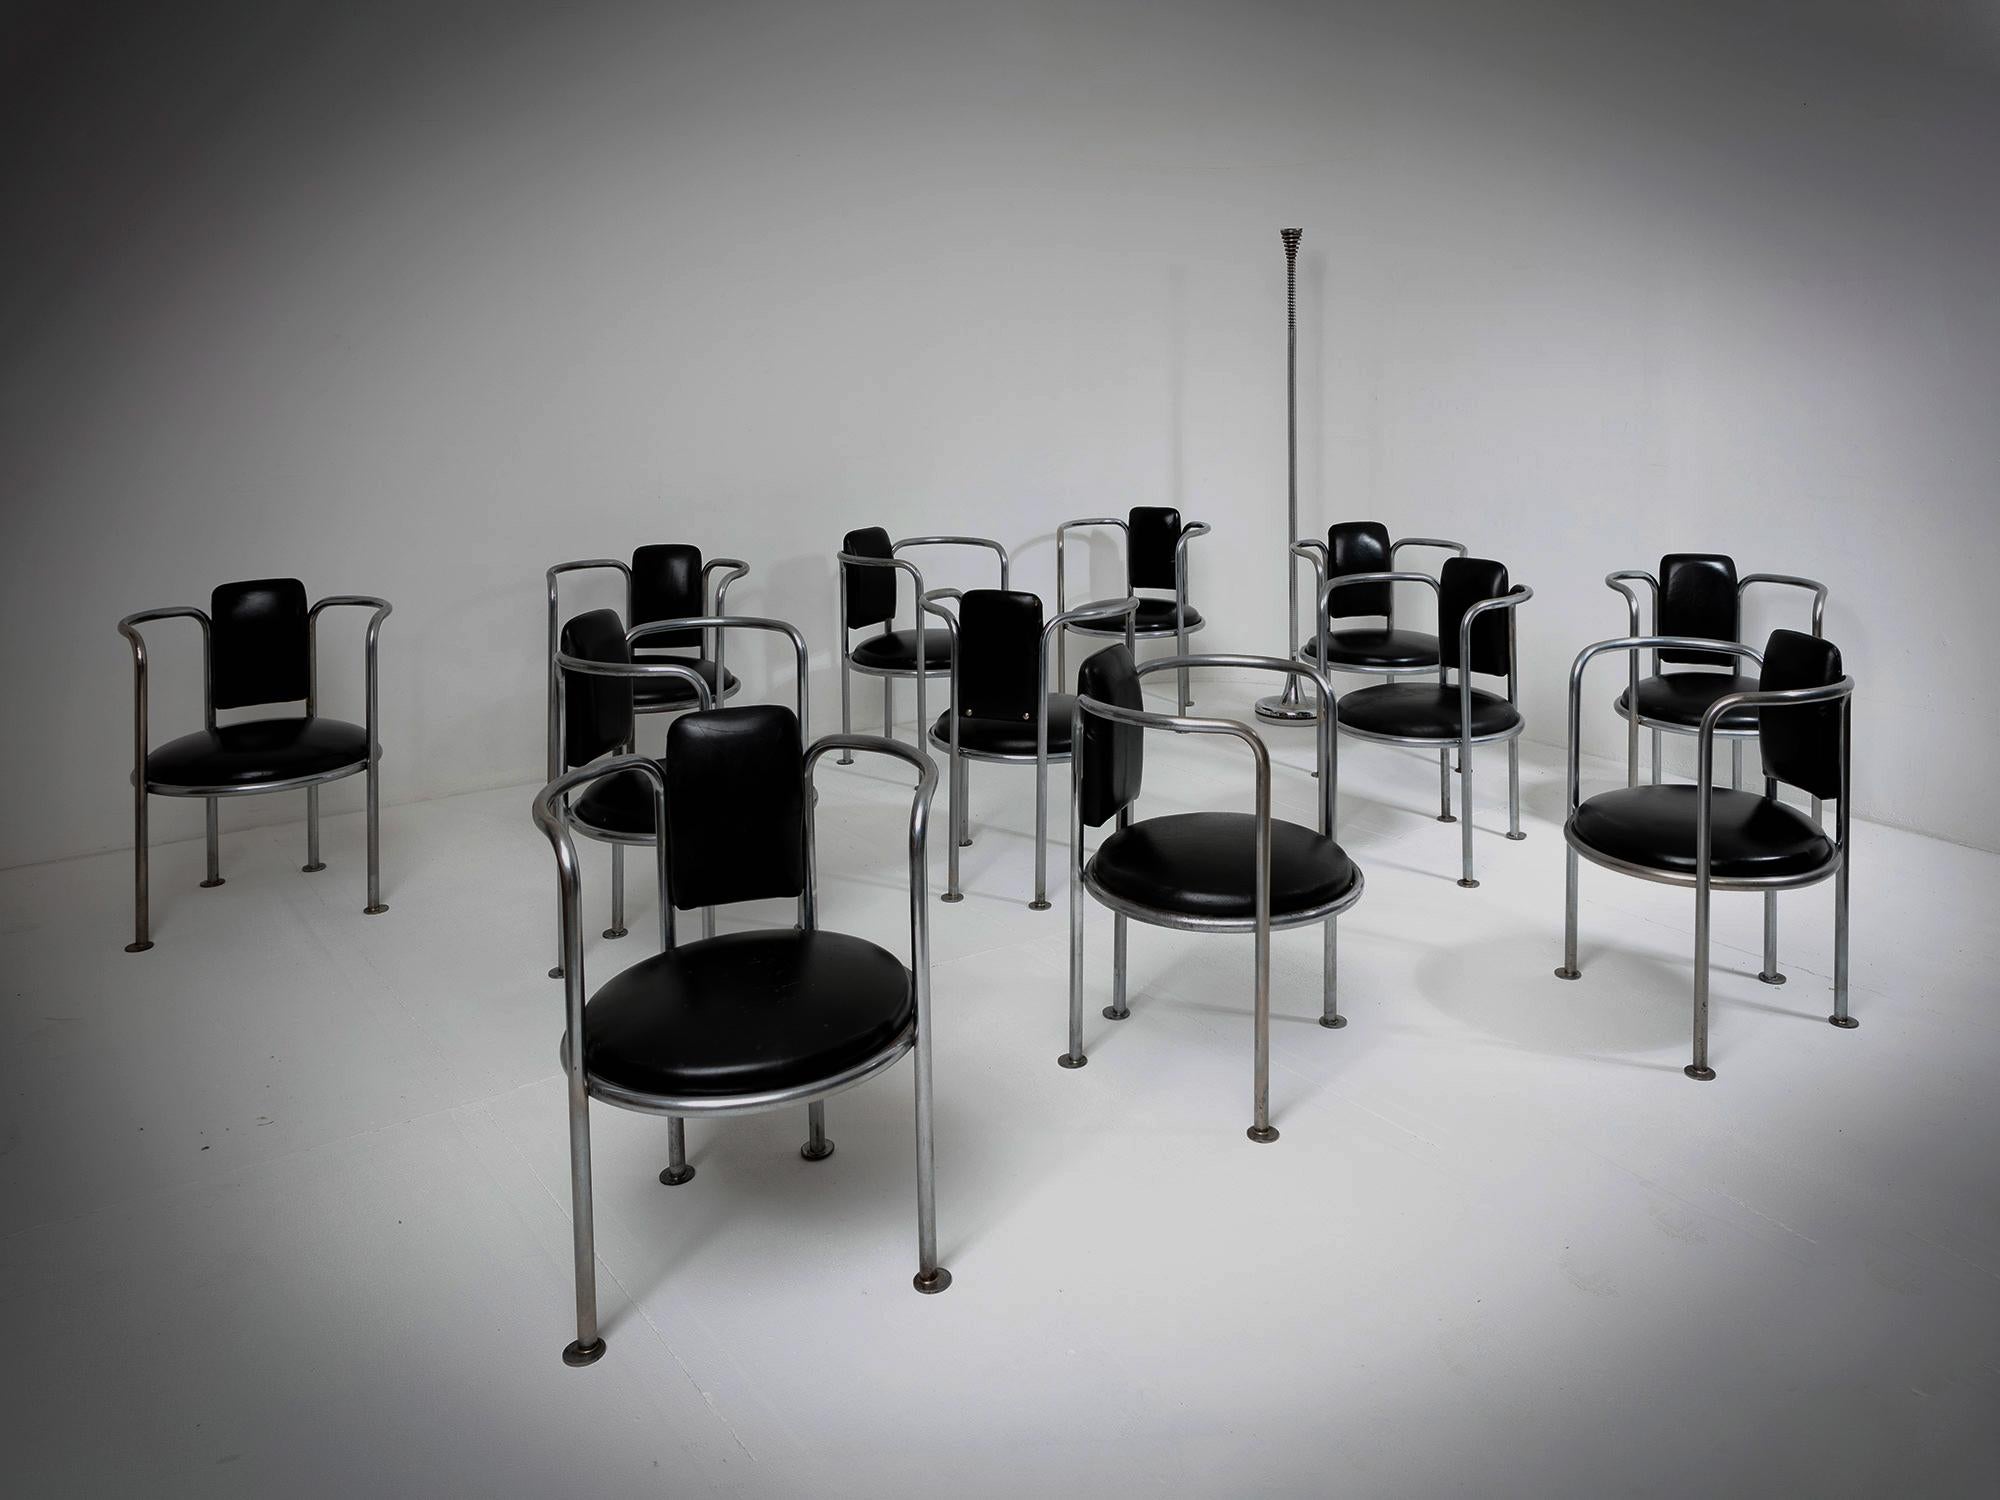 10 armchairs in the style of Gae Aulenti Locus Solus model for Poltronova.
Chrome frame and original black leather seat and back rests.
Tall armrests ensure a comfortable seat.
Available as set of 4, 6 or 10.